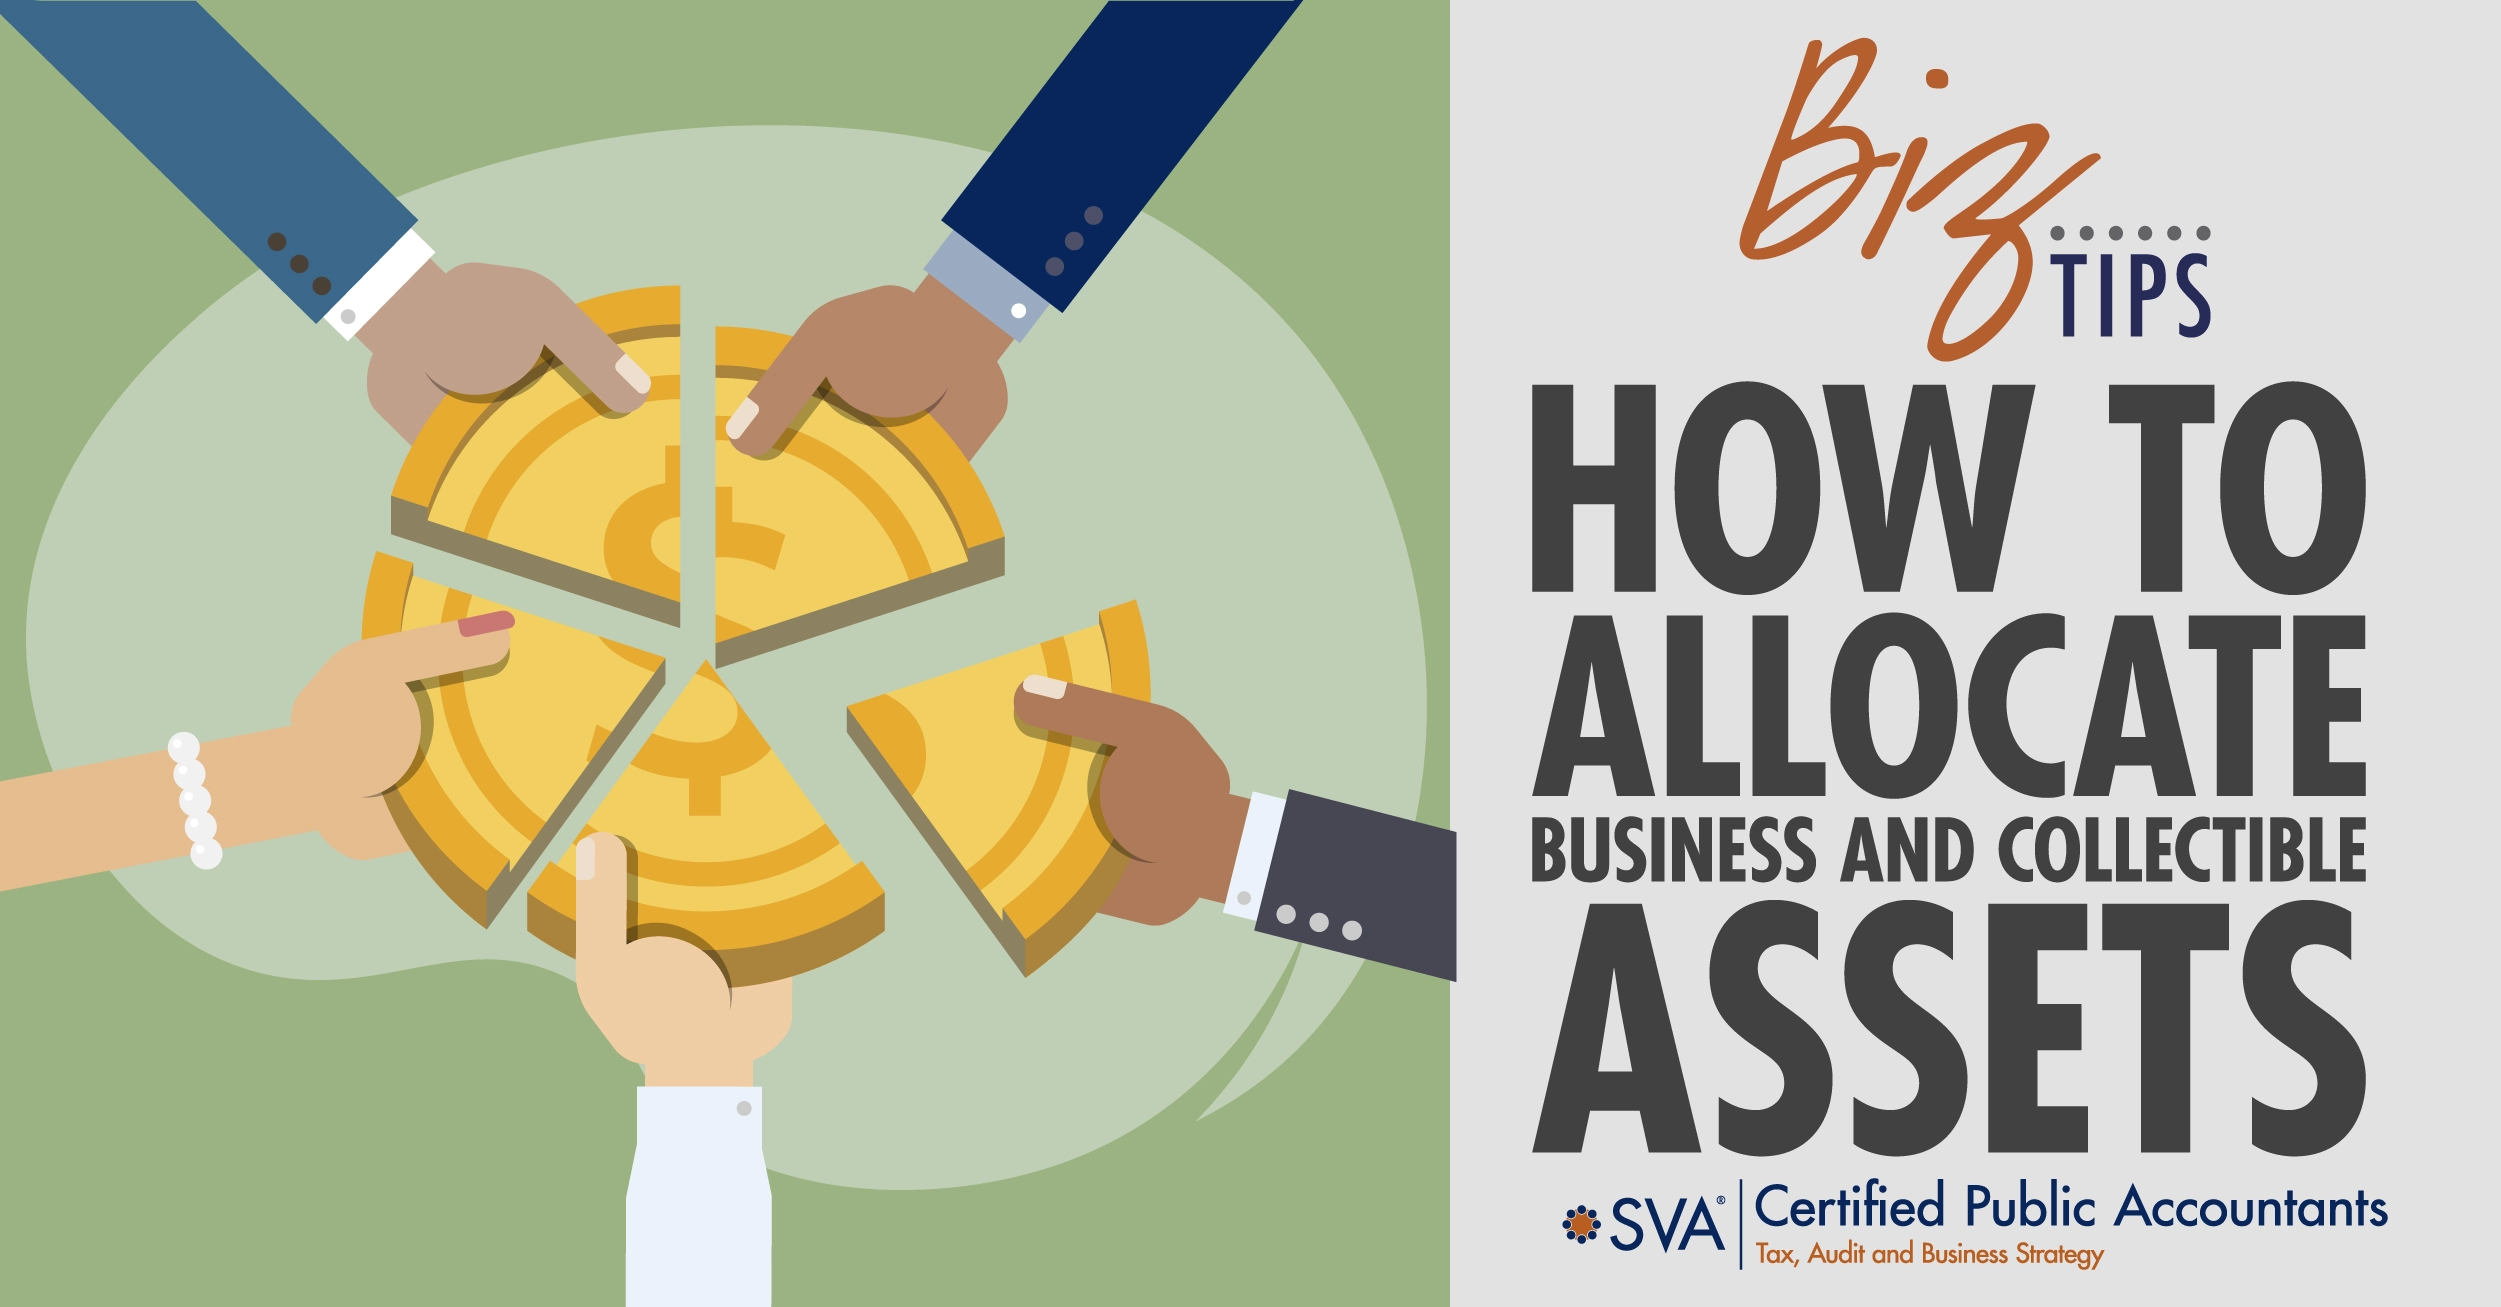 How to Allocate Business and Collectible Assets